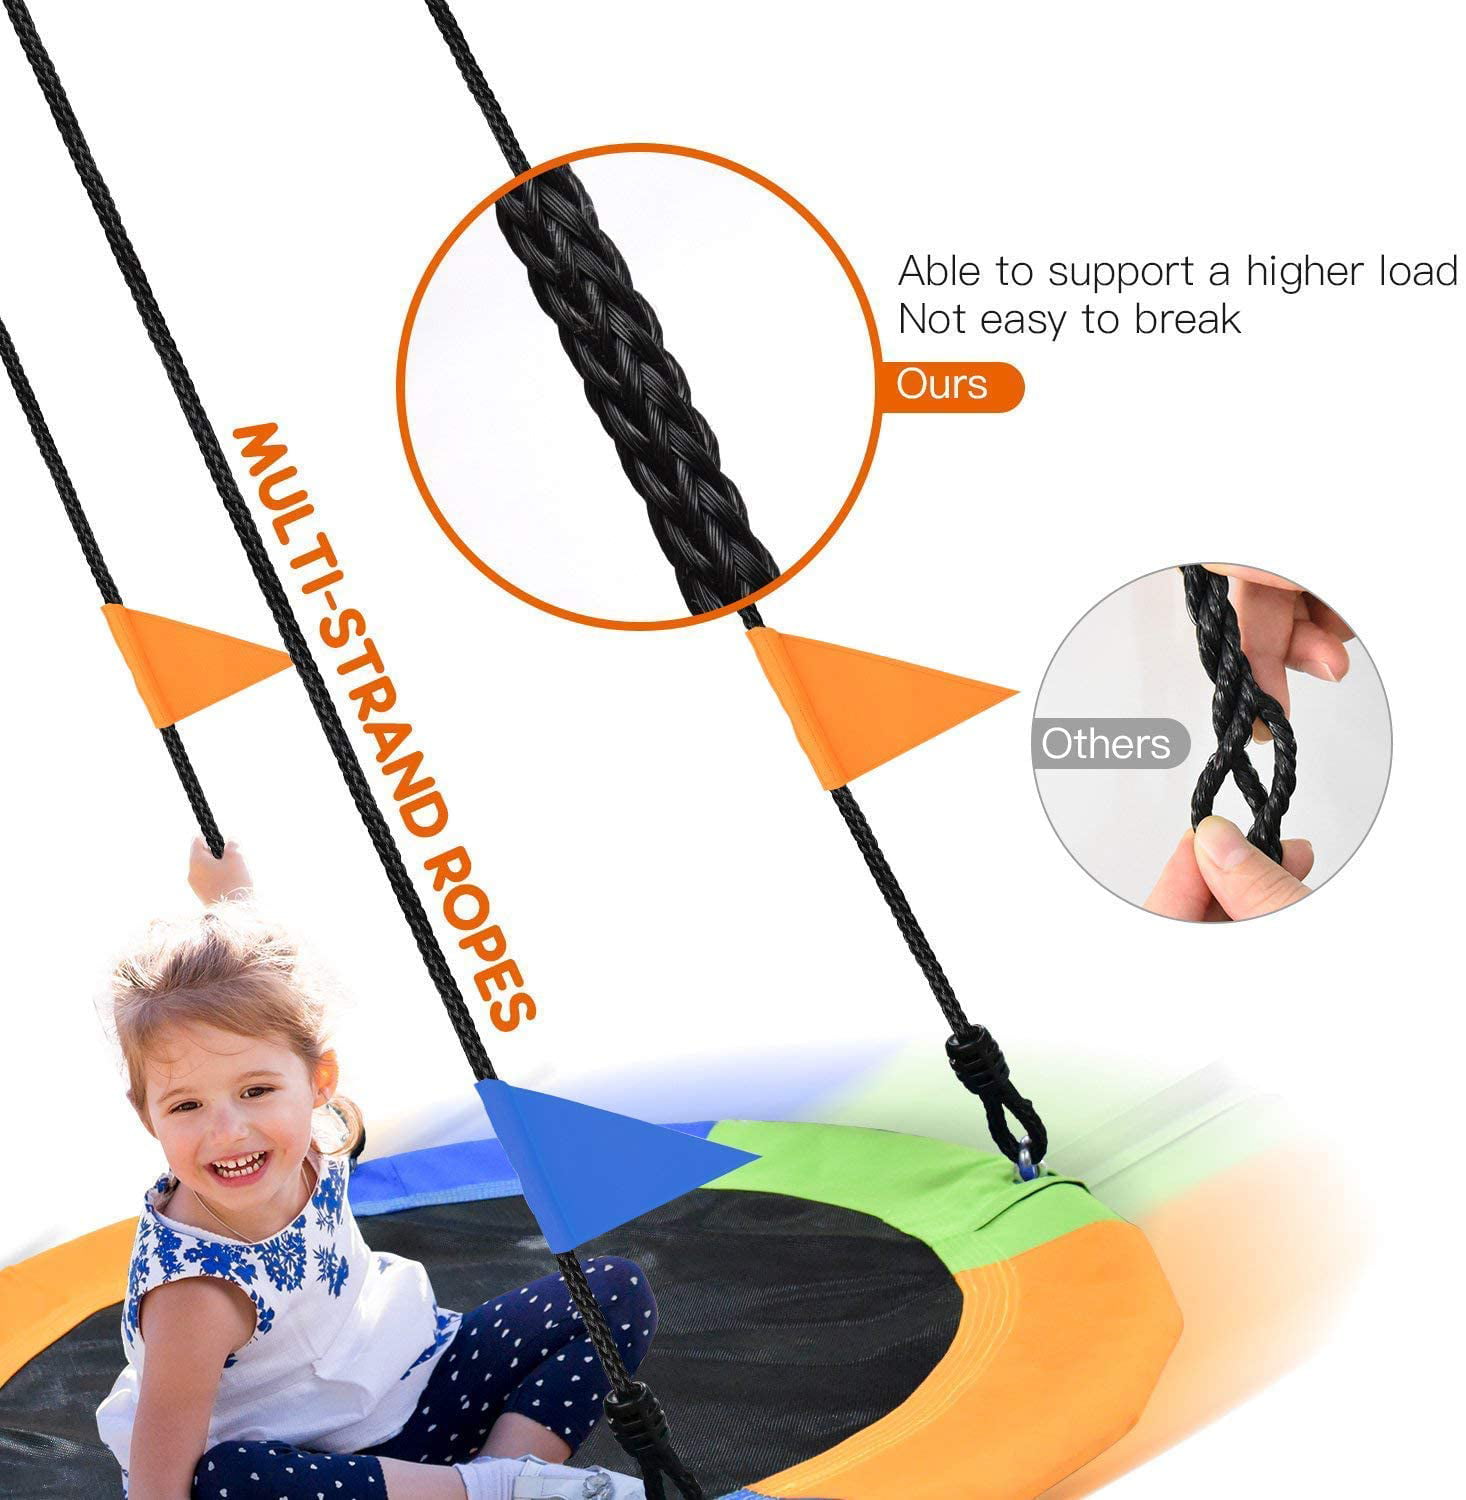 XMSound 40 Inch Saucer Tree Swing Flying 660lb Weight Capacity Adjustable Multi-Strand Ropes Colorful Safe and Durable Swing Seat for Children Adults Outdoor Indoor Playground Swing 